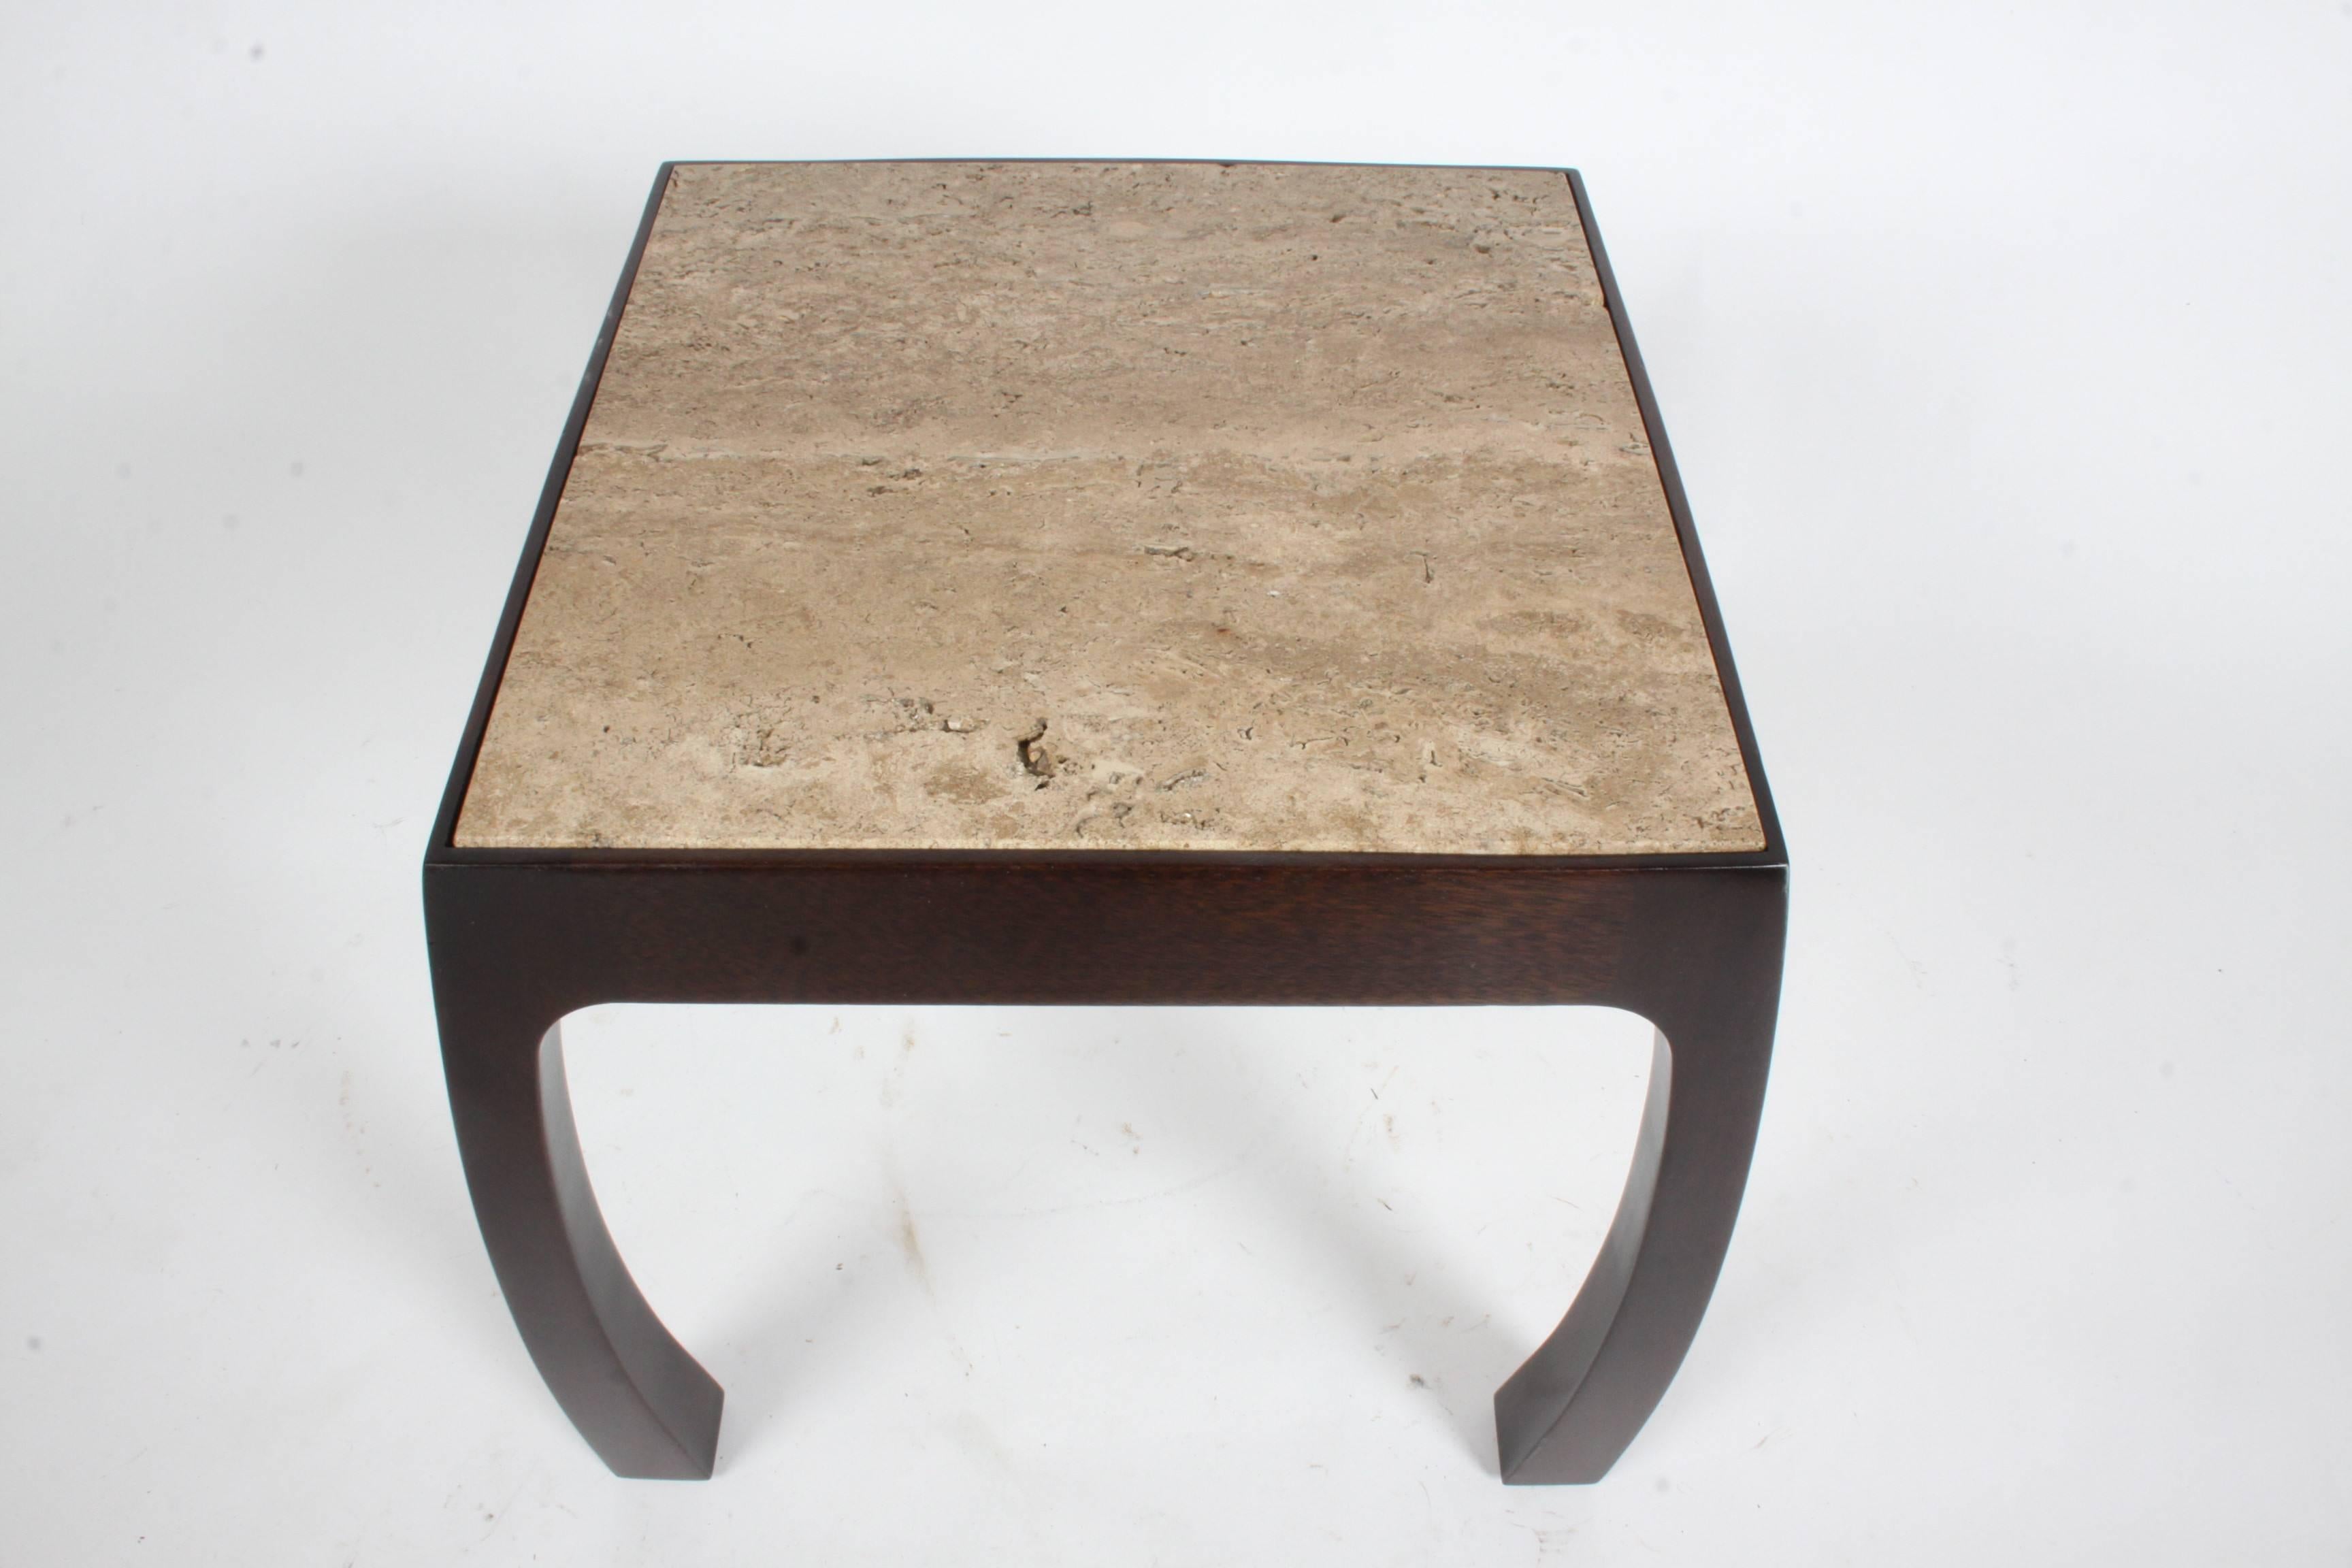 Harvey Probber Asian style side table with Italian walnut Roman travertine. The sculptural mahogany base has just been refinished, color matched to original dark brown.